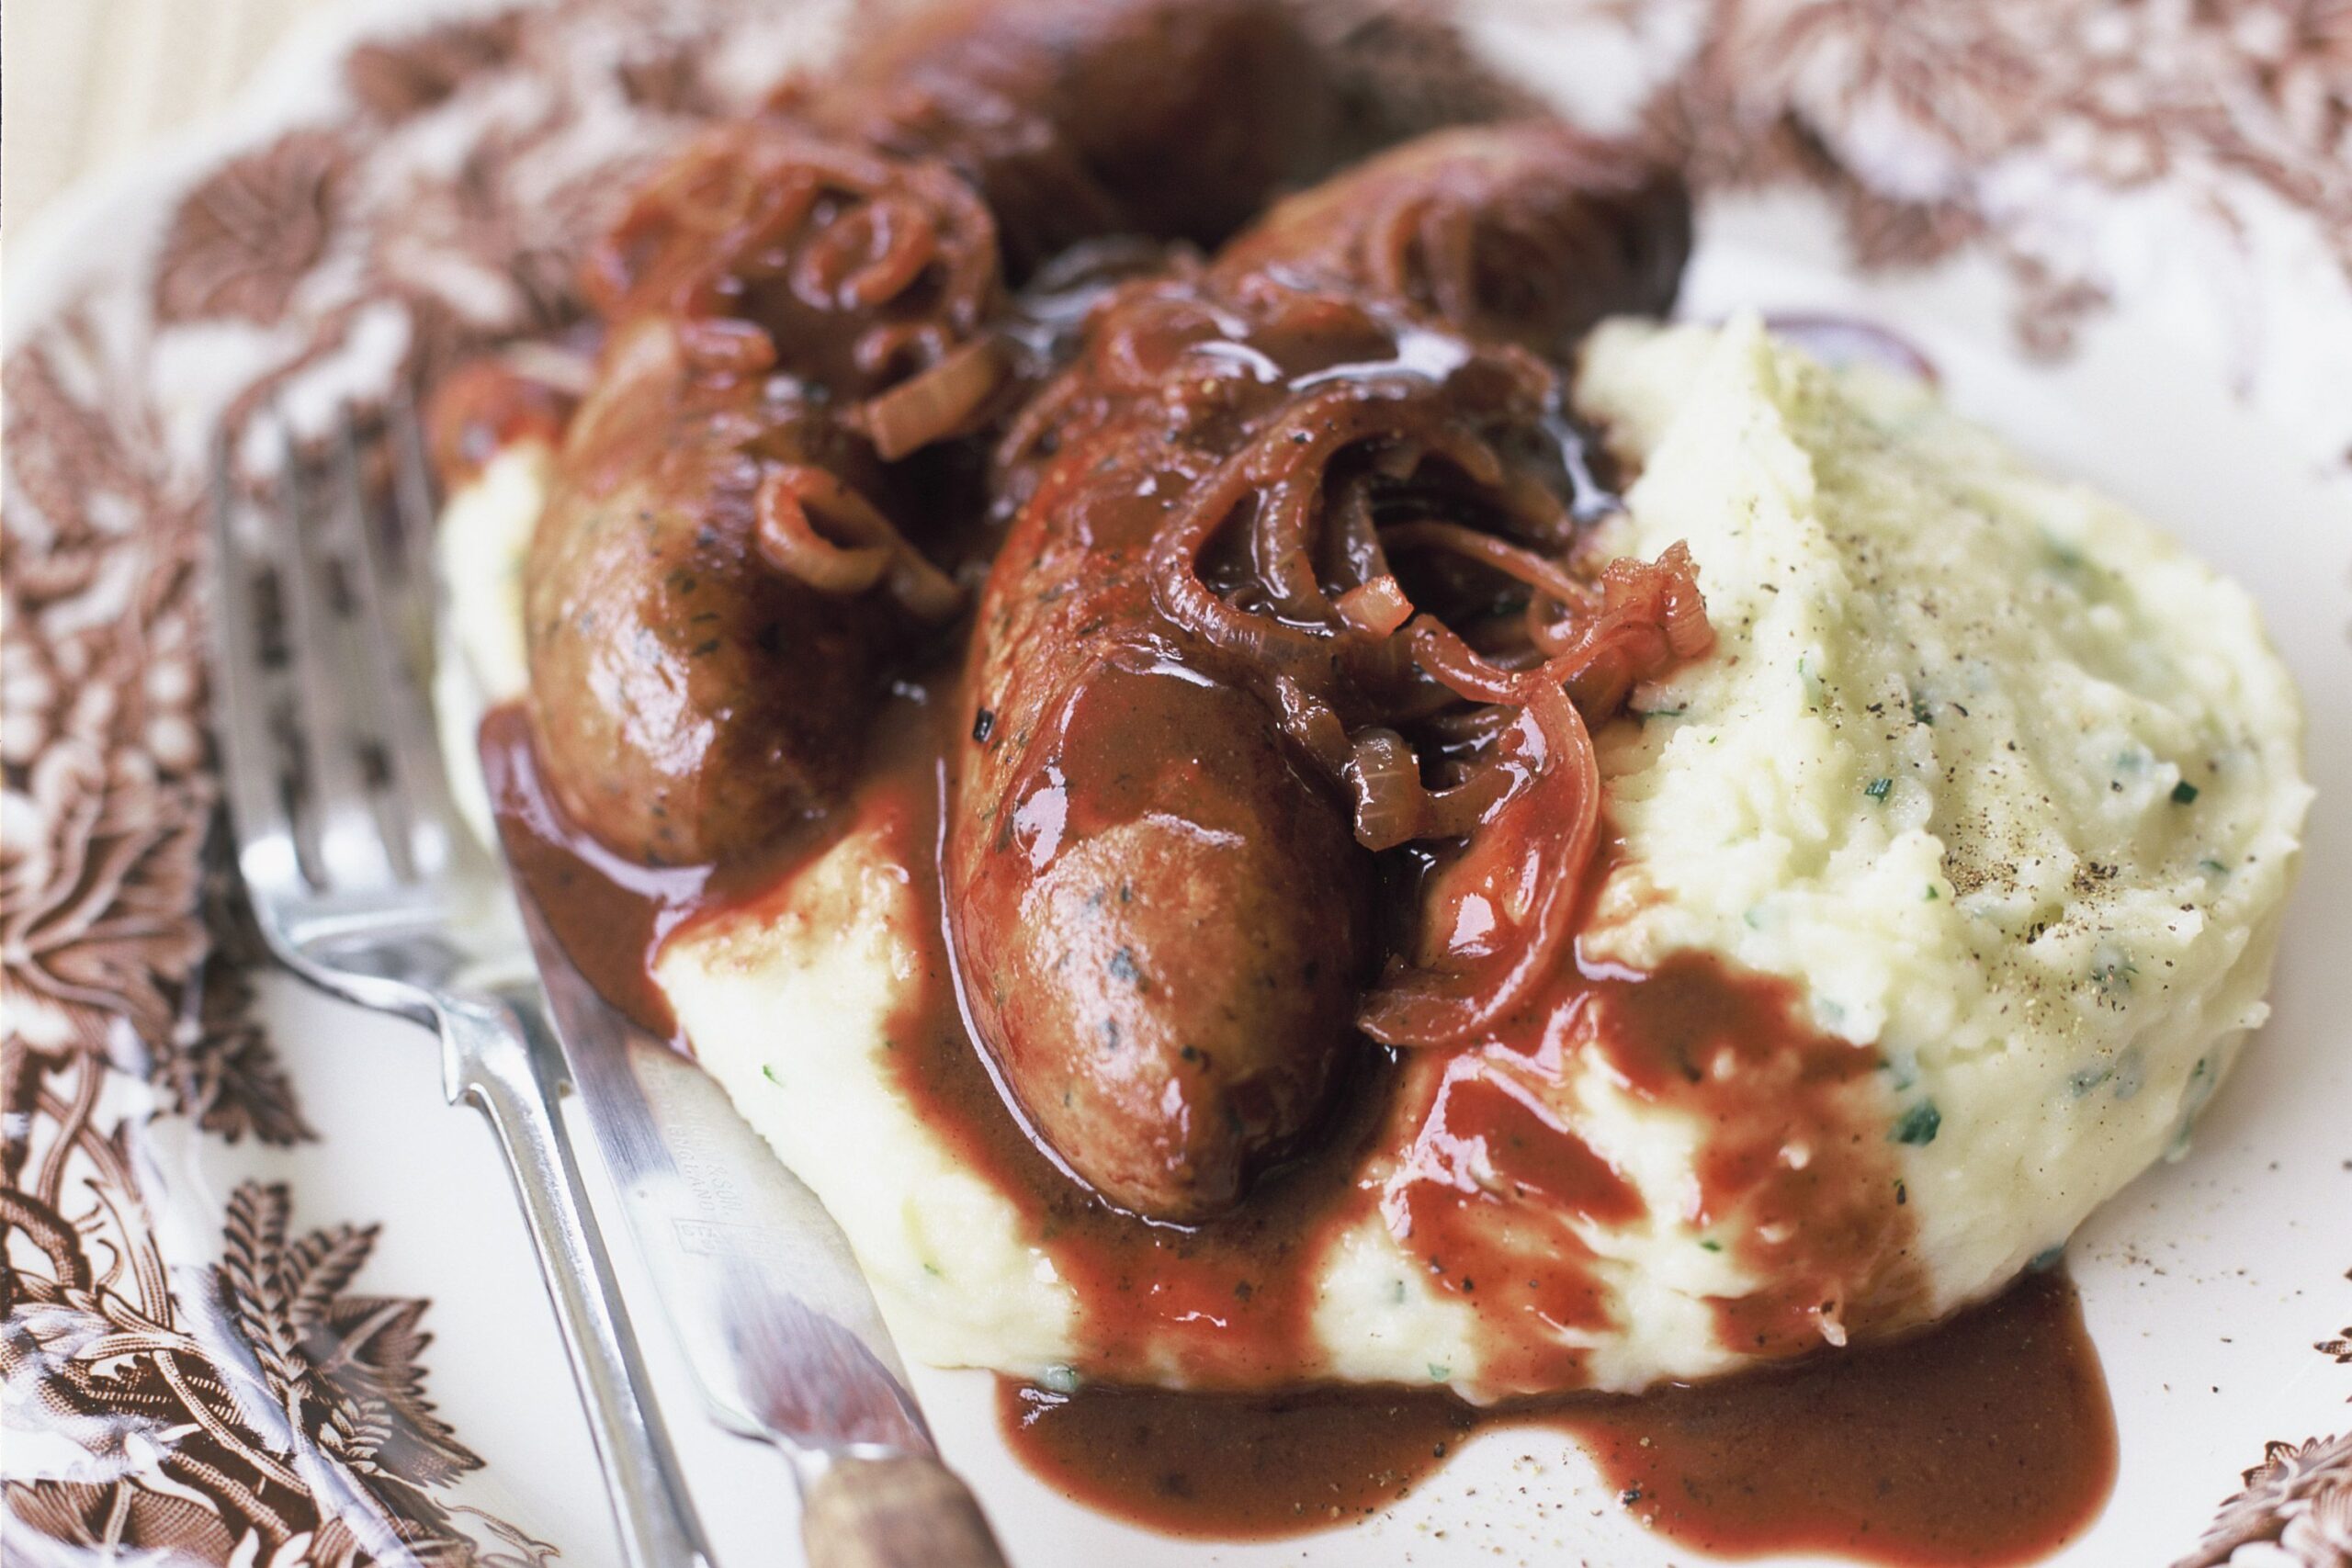 Sausages with onion gravy and aligot